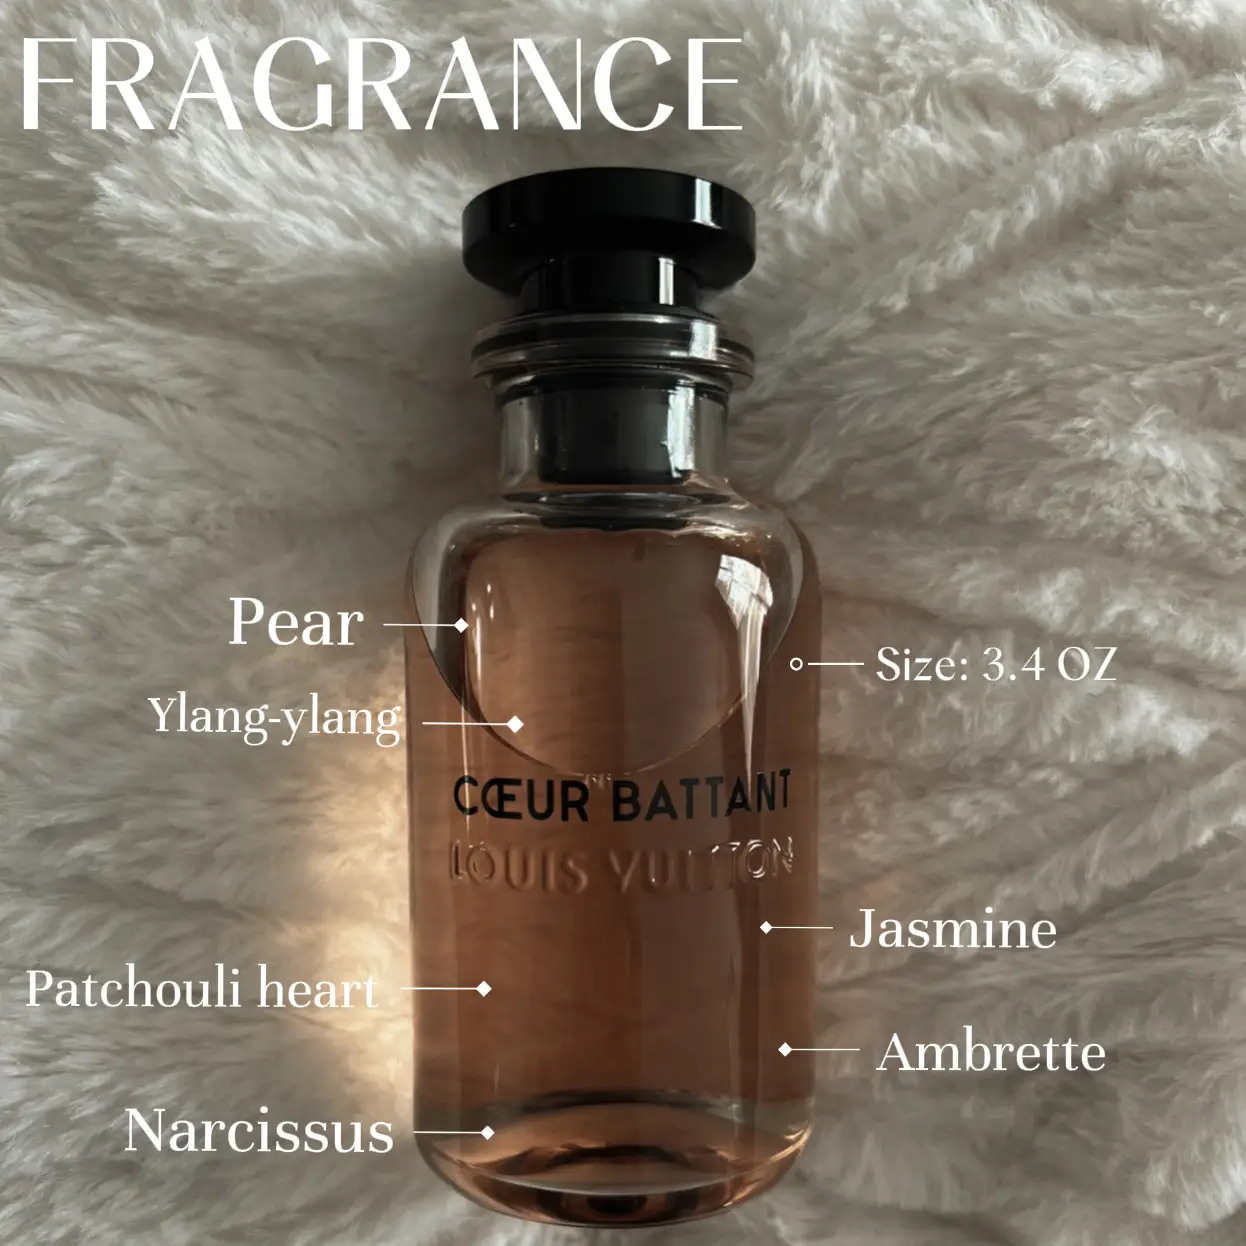 Coeur Battant - Perfumes - Collections